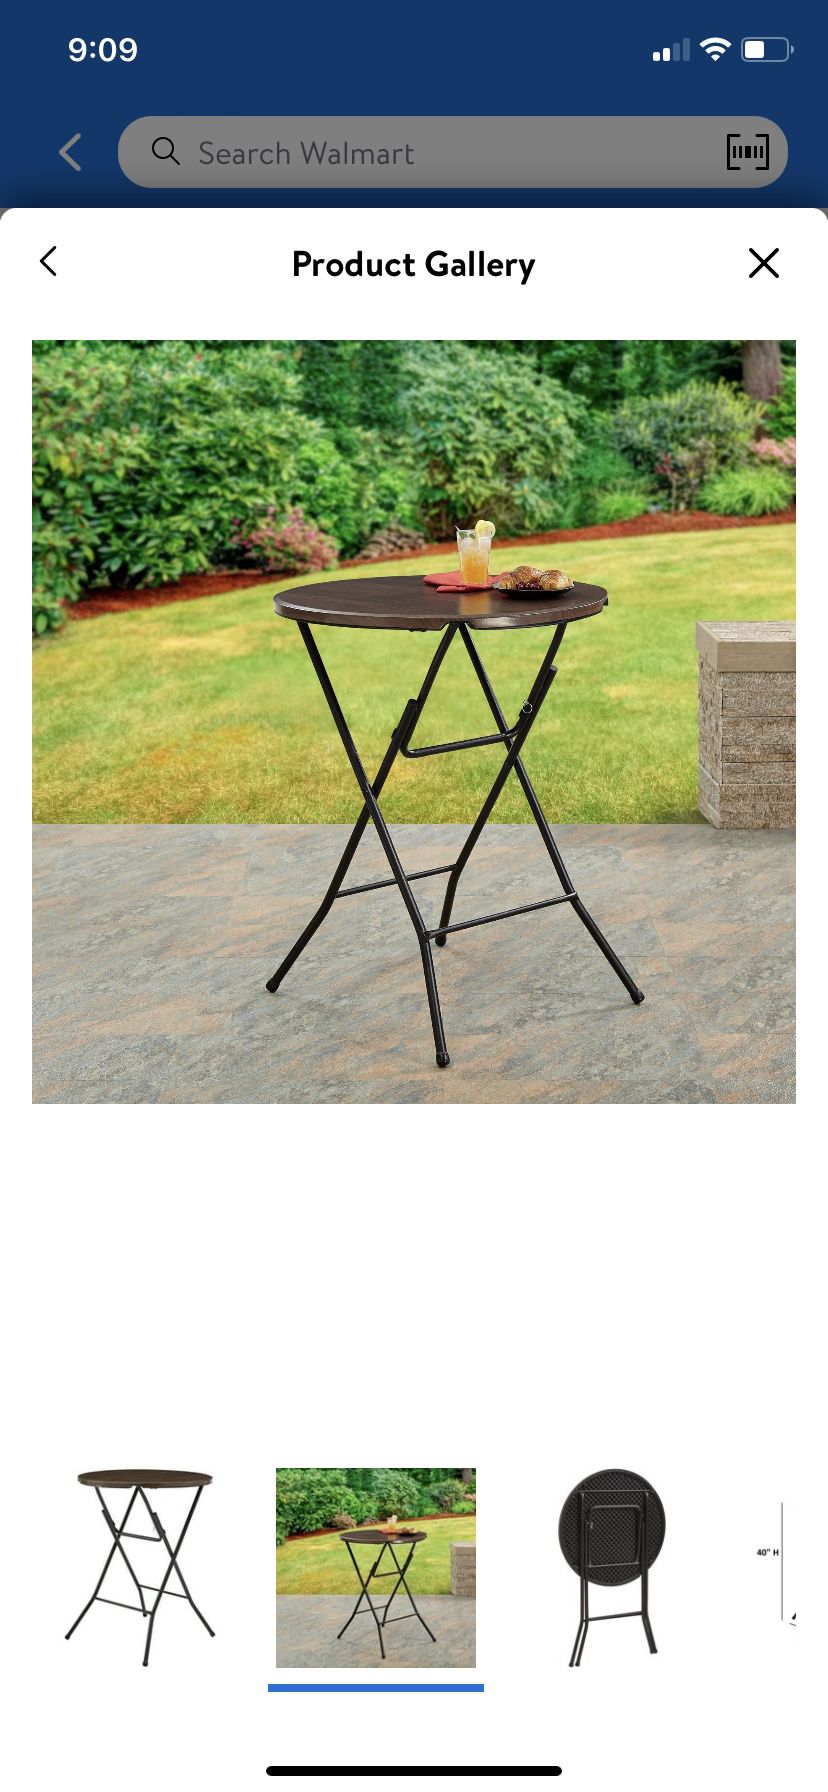 Folding Outdoor Table 